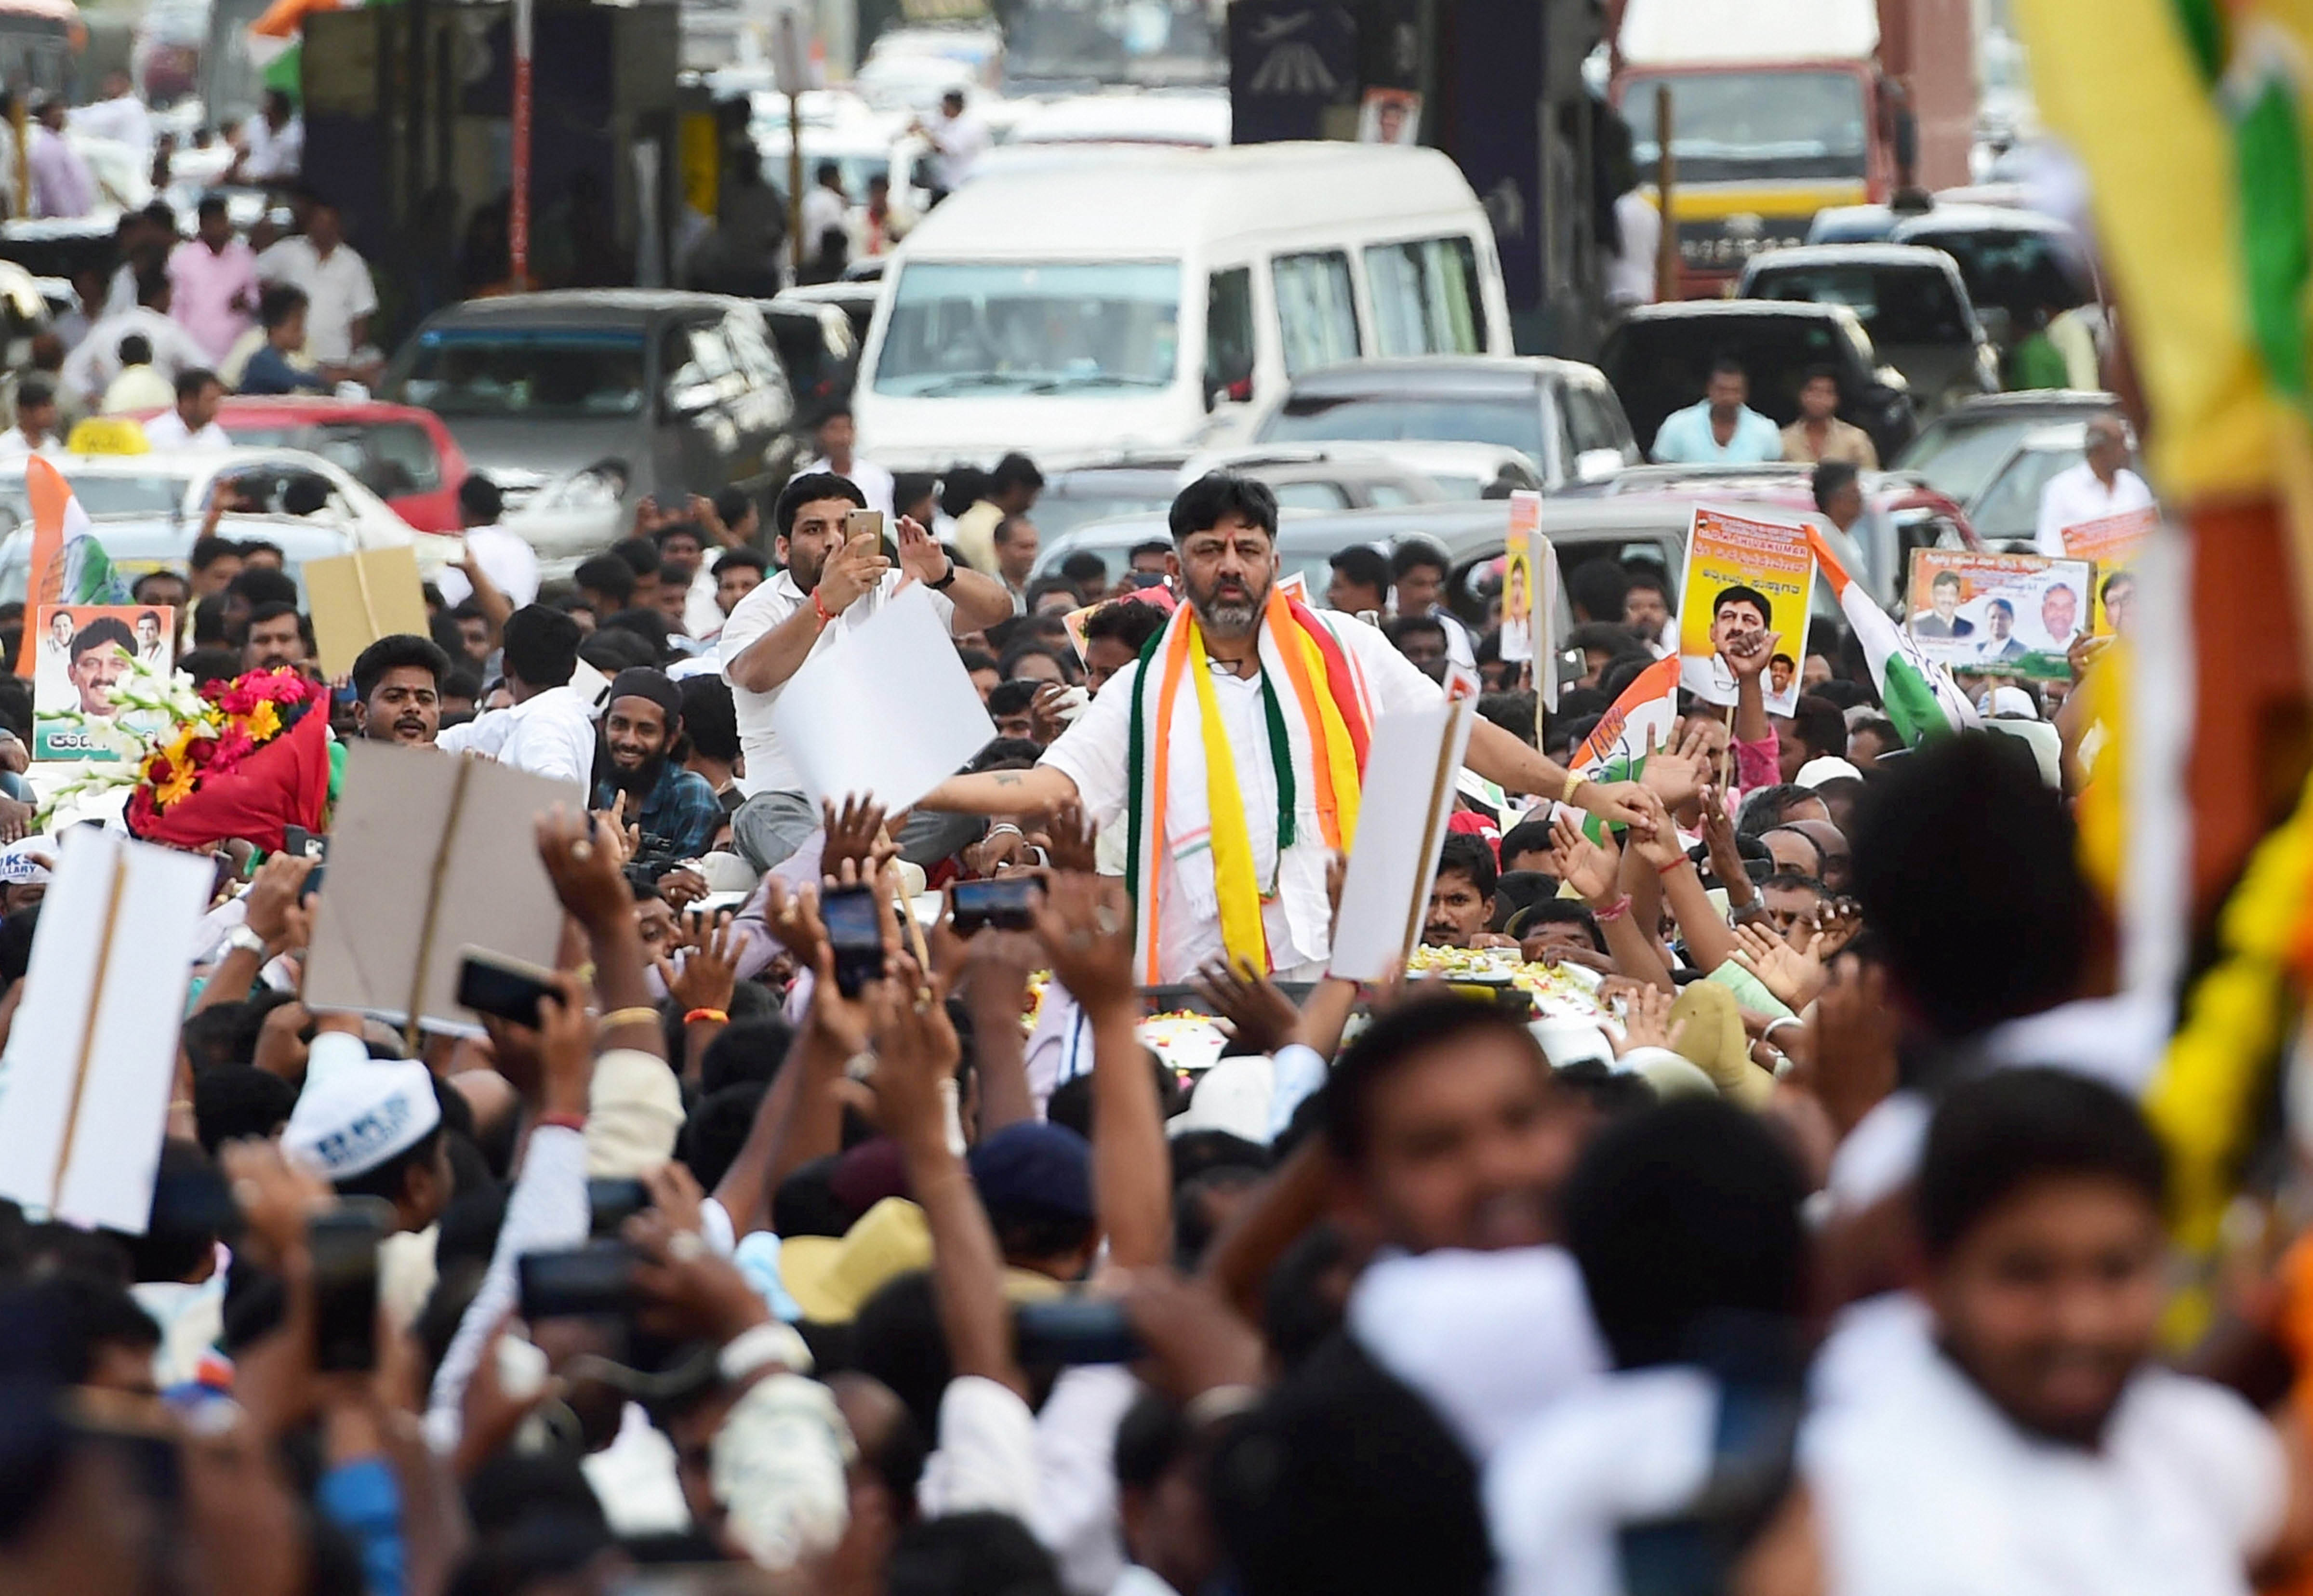 Shivakumar accorded tumultuous welcome by supporters in Bengaluru